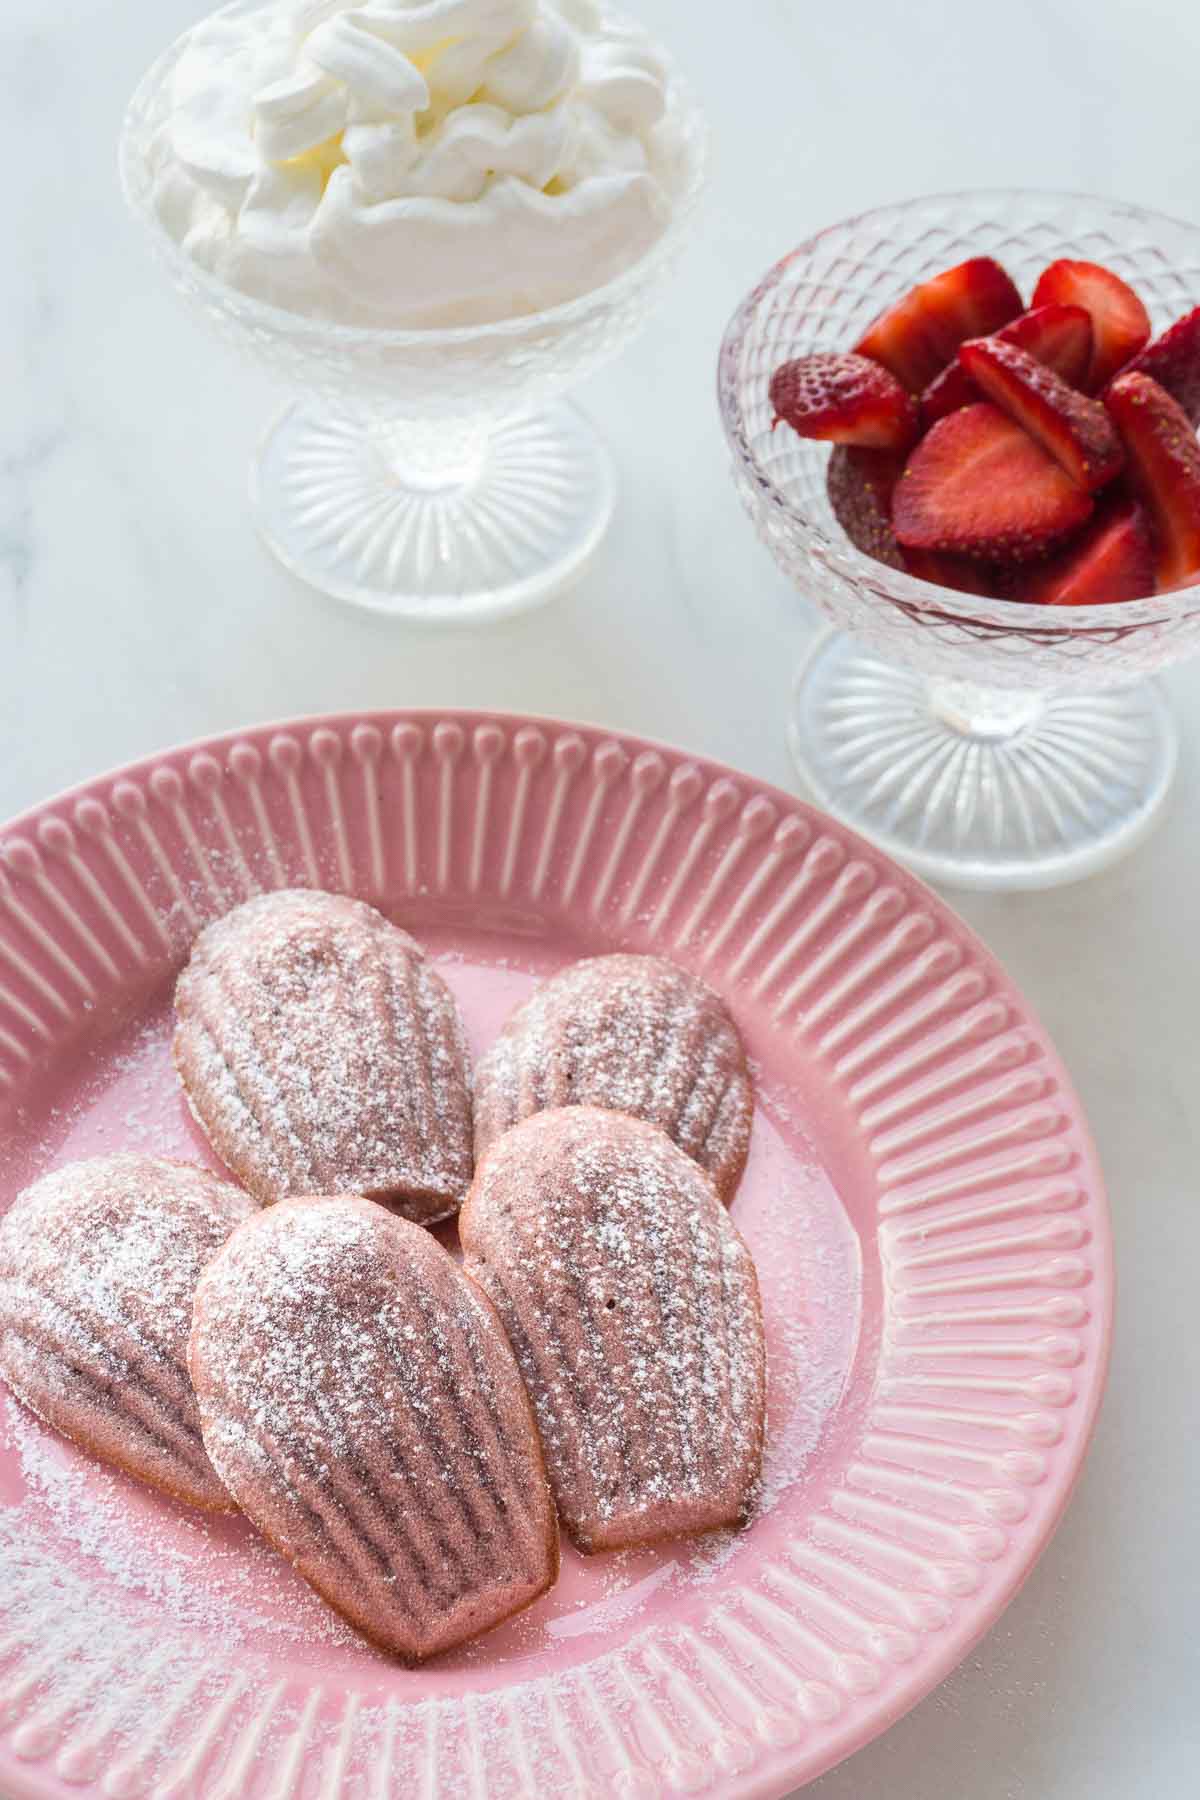 Pink strawberry madeleines in front of two bowls - one with strawberries, the other with cream.